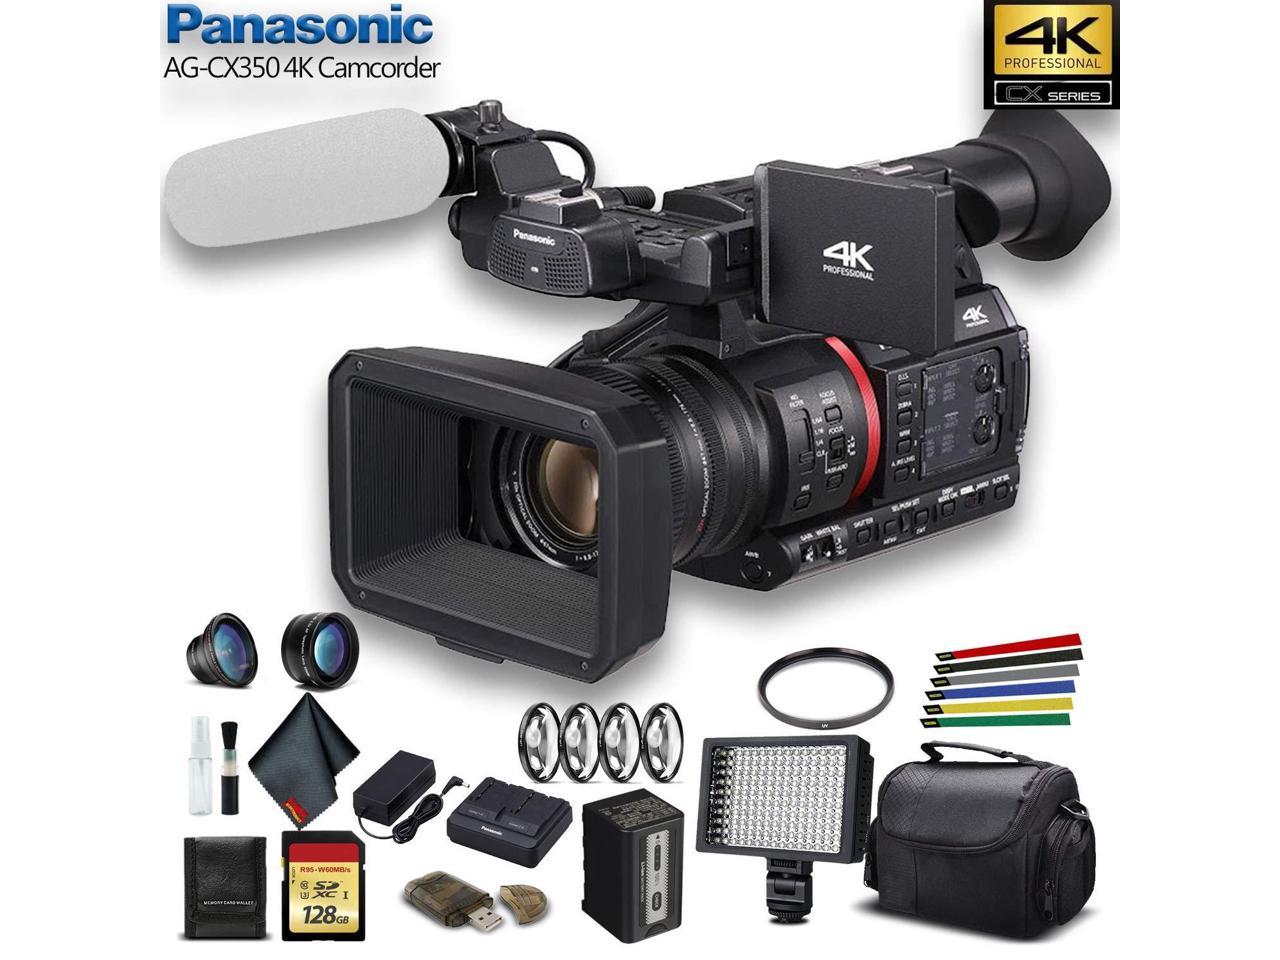 Panasonic 4K Camcorder W/ Padded Case, 128 GB Memory Card, Lens Attachments, Wire Straps, LED Light, And More�